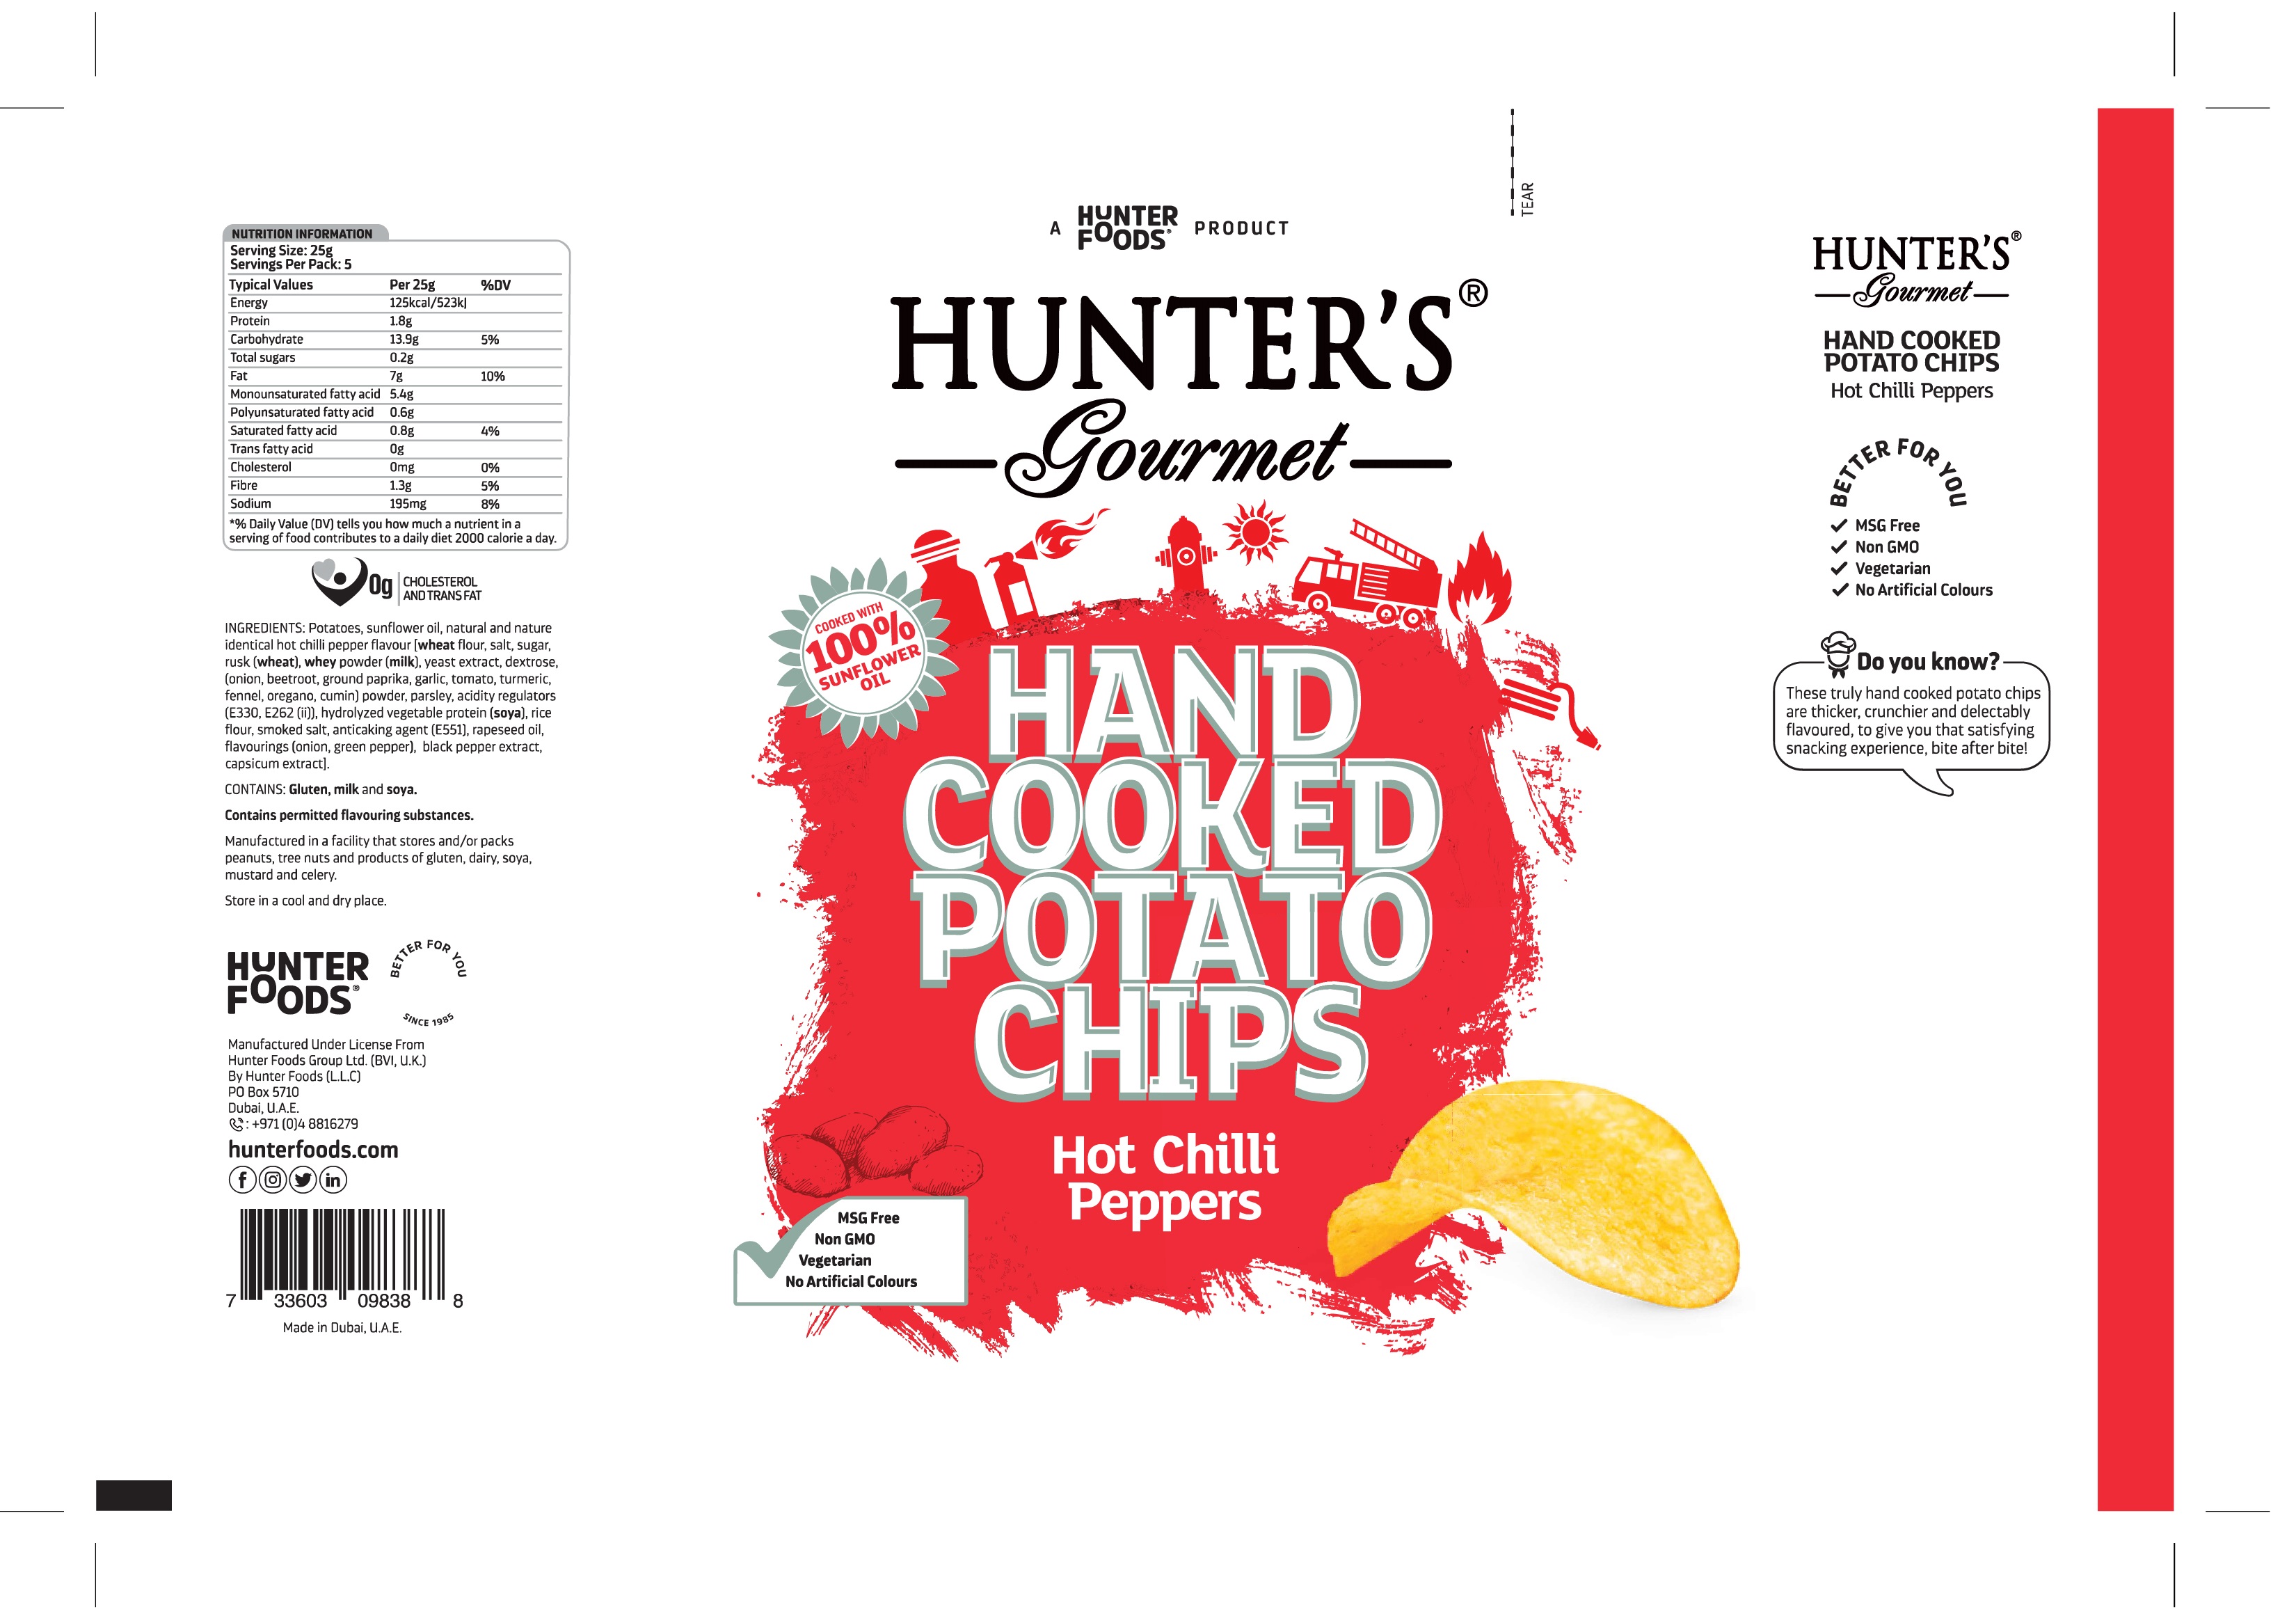 Hunter's Gourmet Hand Cooked Potato Chips Hot Chilli Peppers 12 units per case 125 g Product Label